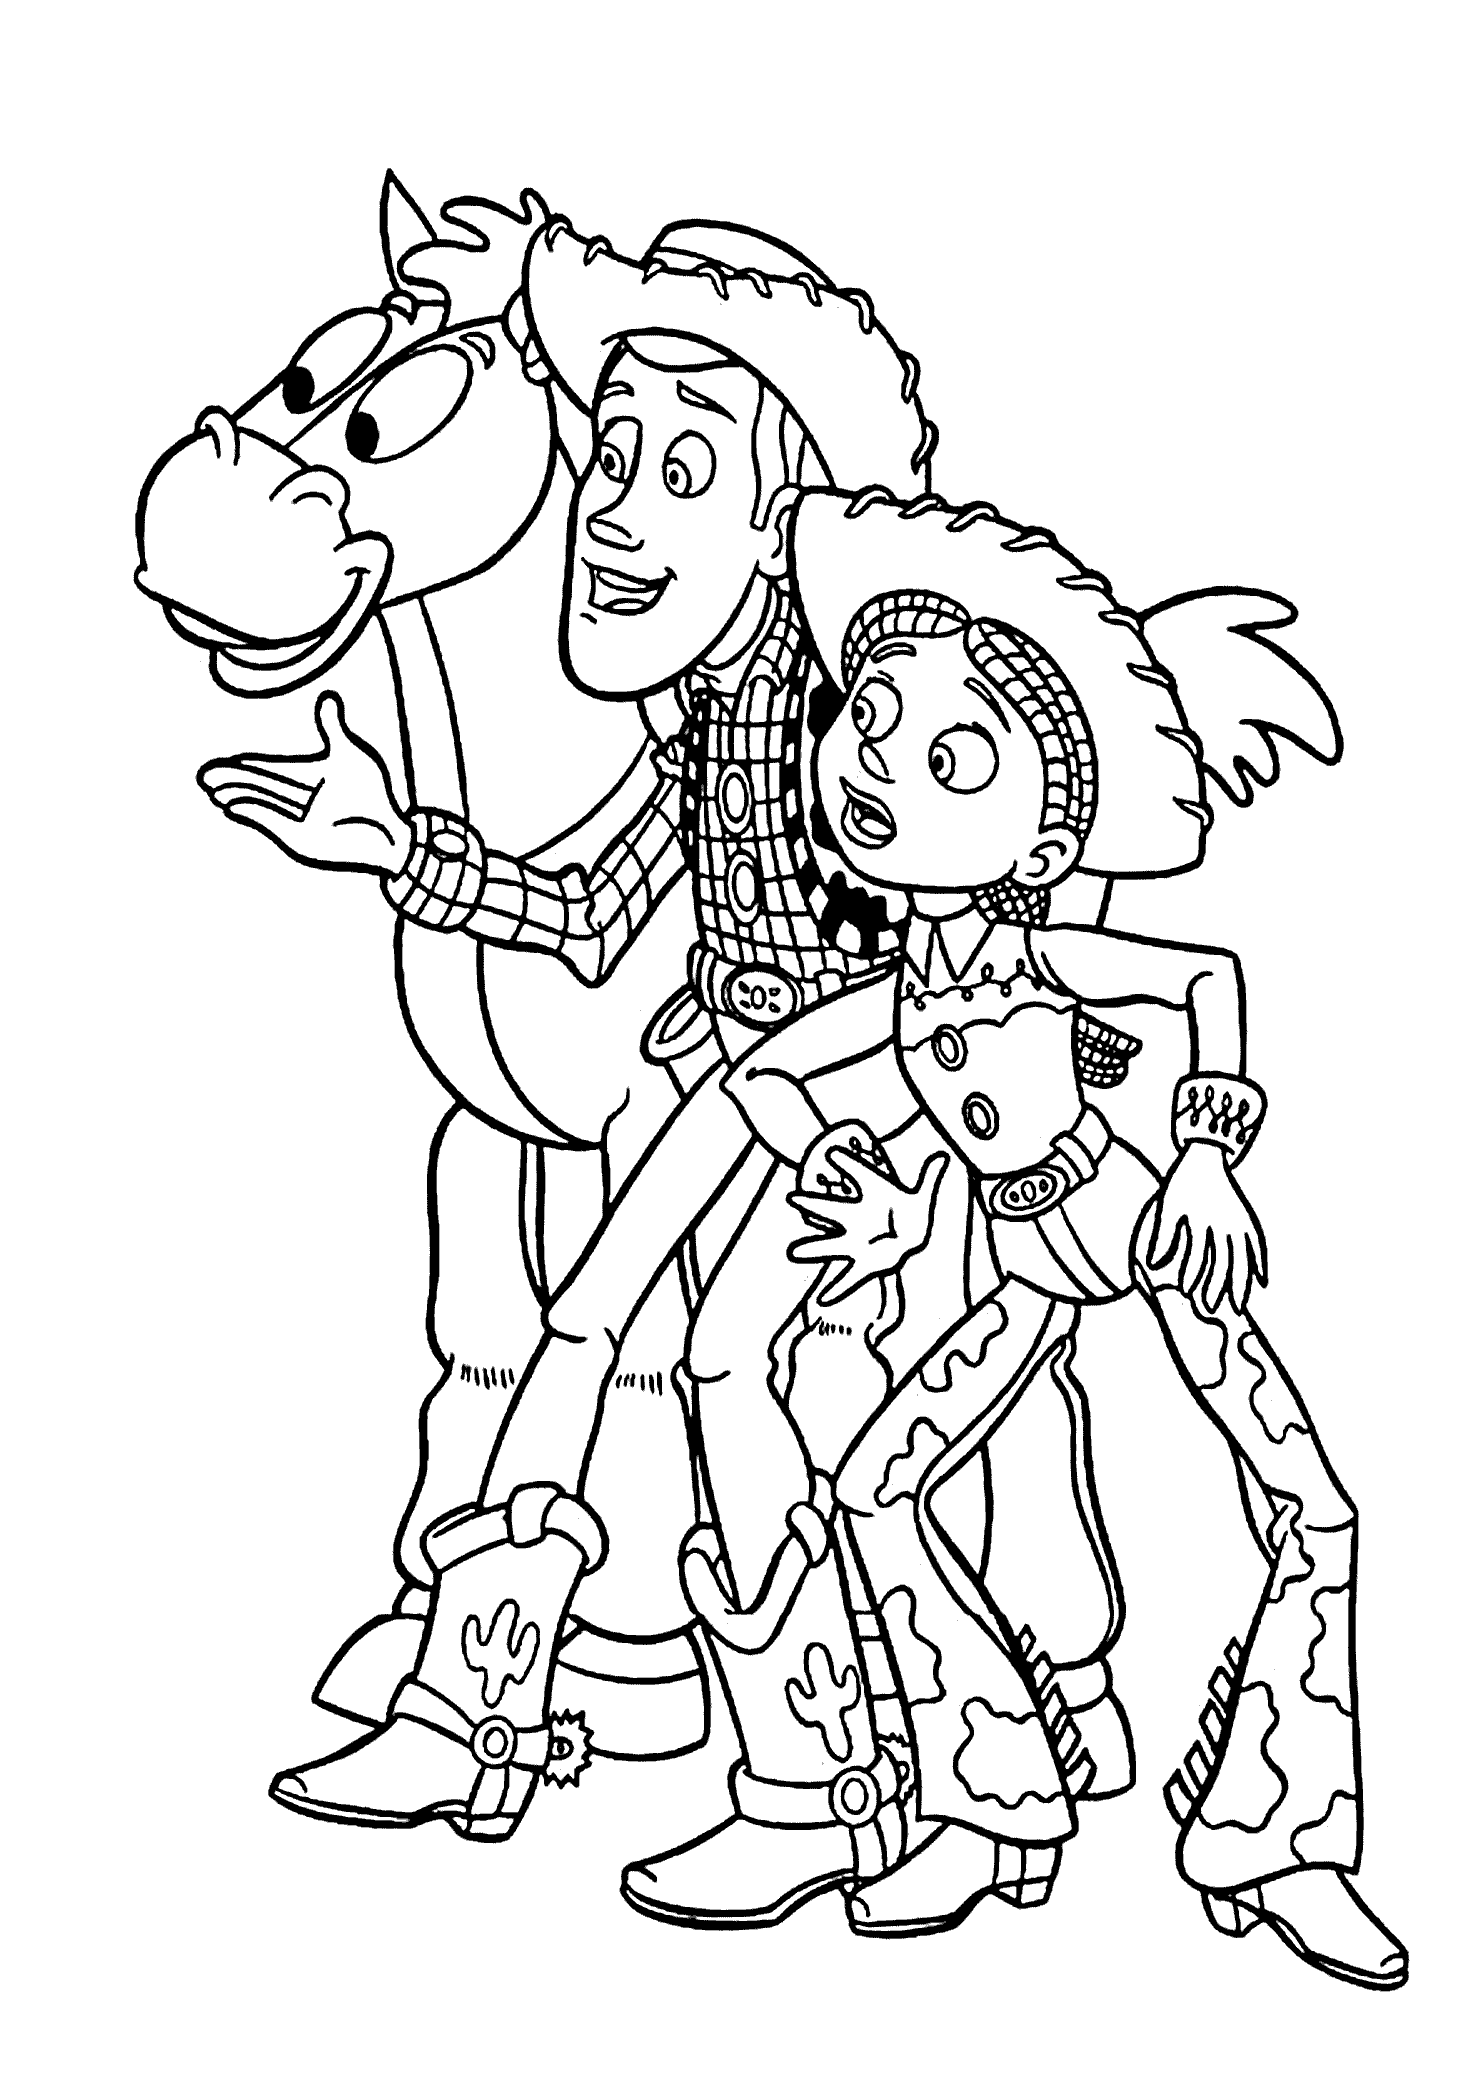 Toy Story Printable Coloring Pages - Printable World Holiday